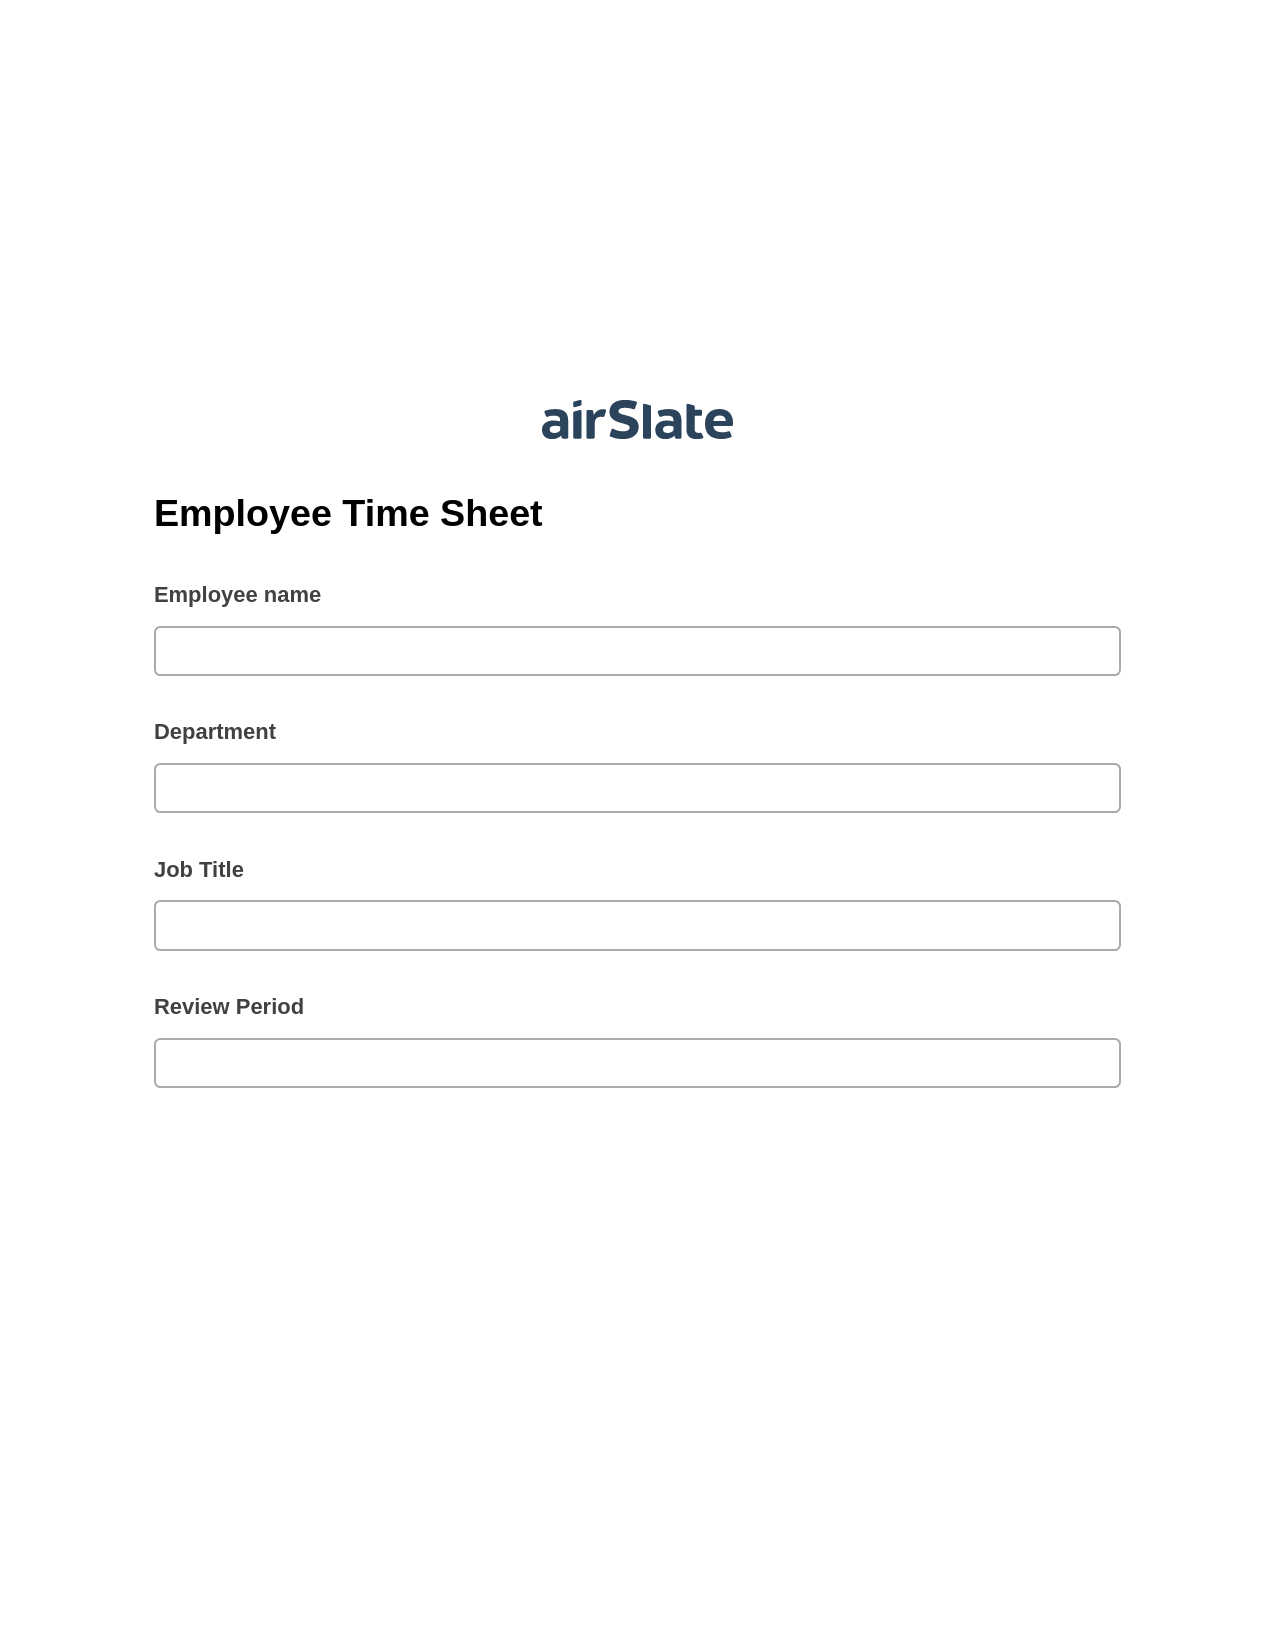 Multirole Employee Time Sheet Pre-fill from MS Dynamics 365 Records, Jira Bot, Archive to SharePoint Folder Bot